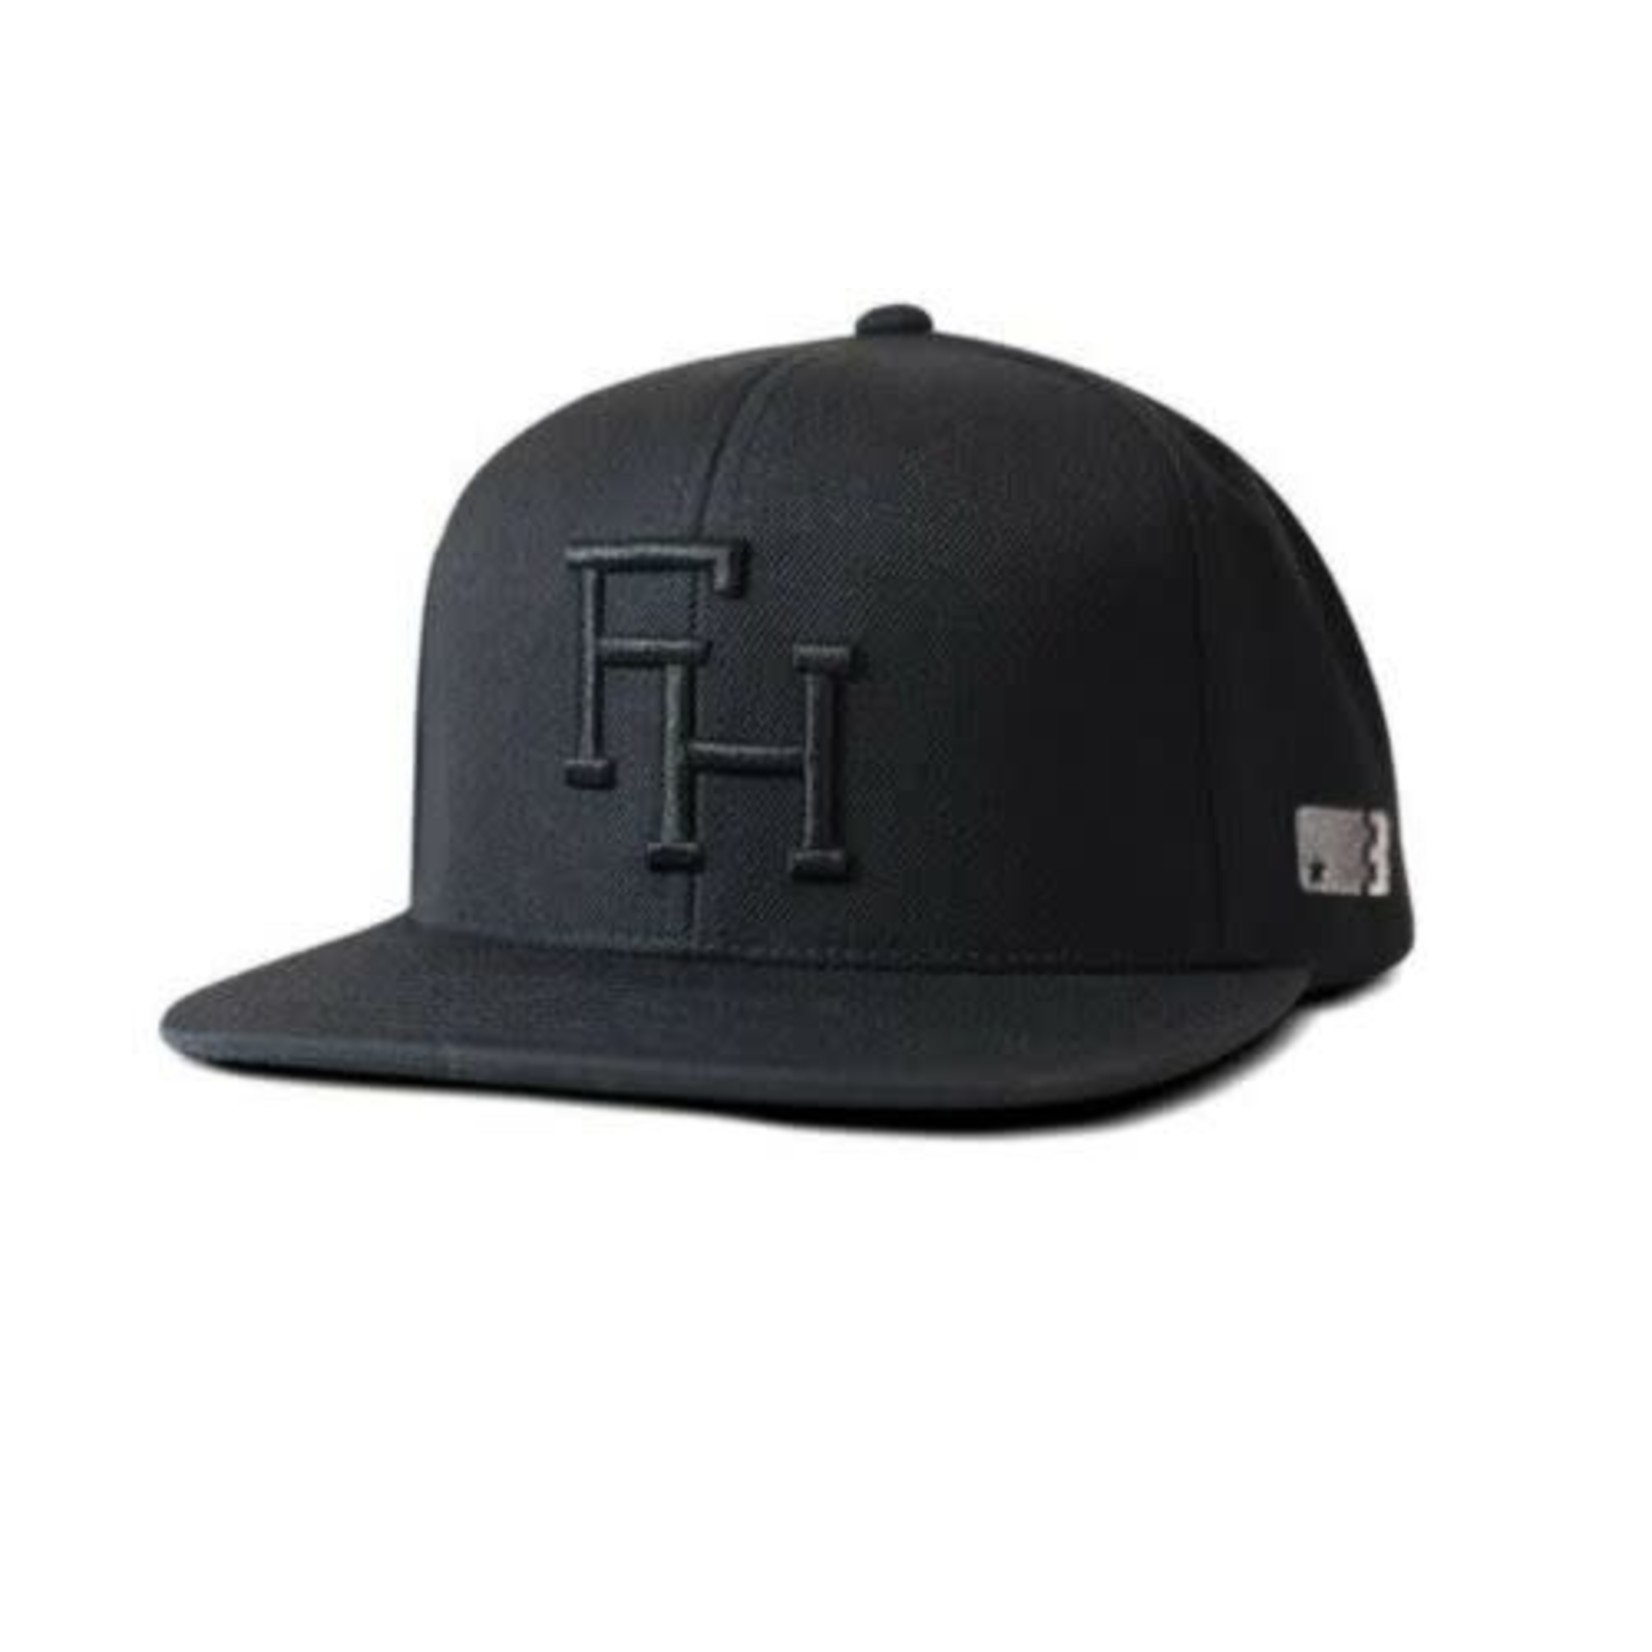 FASTHOUSE FASTHOUSE ALL STAR HAT BLACK-OS